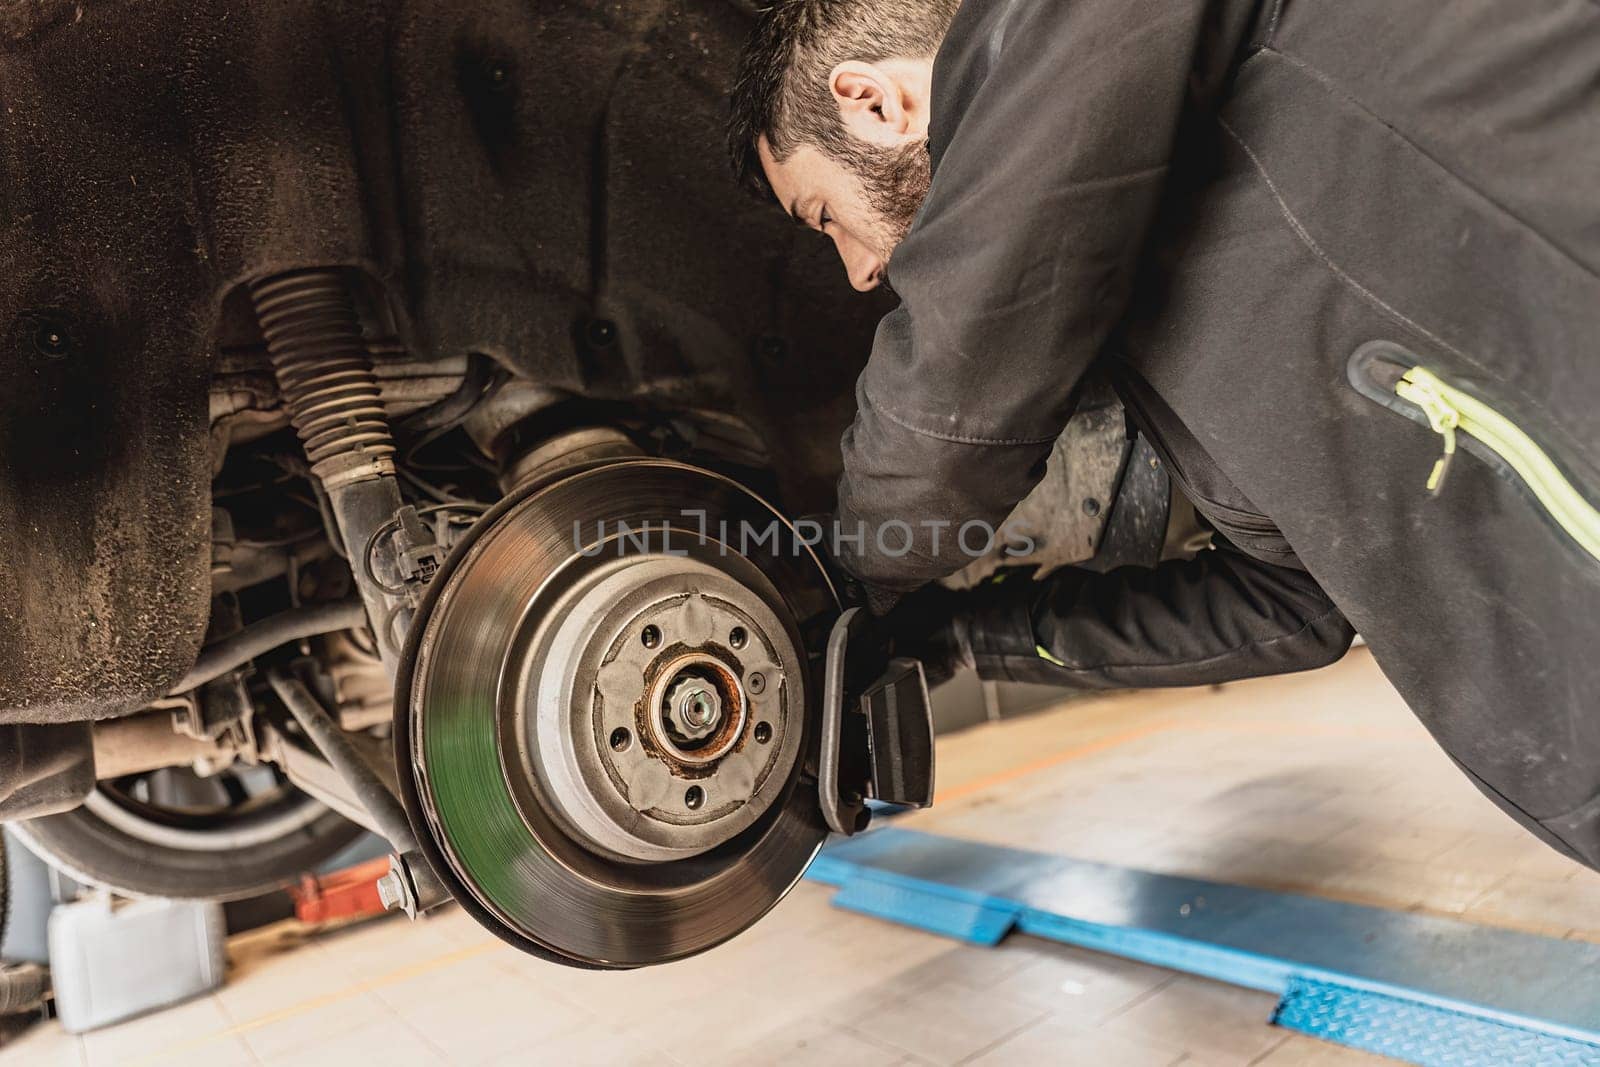 Mechanic Hands Replace Brake Pads on Car by pippocarlot